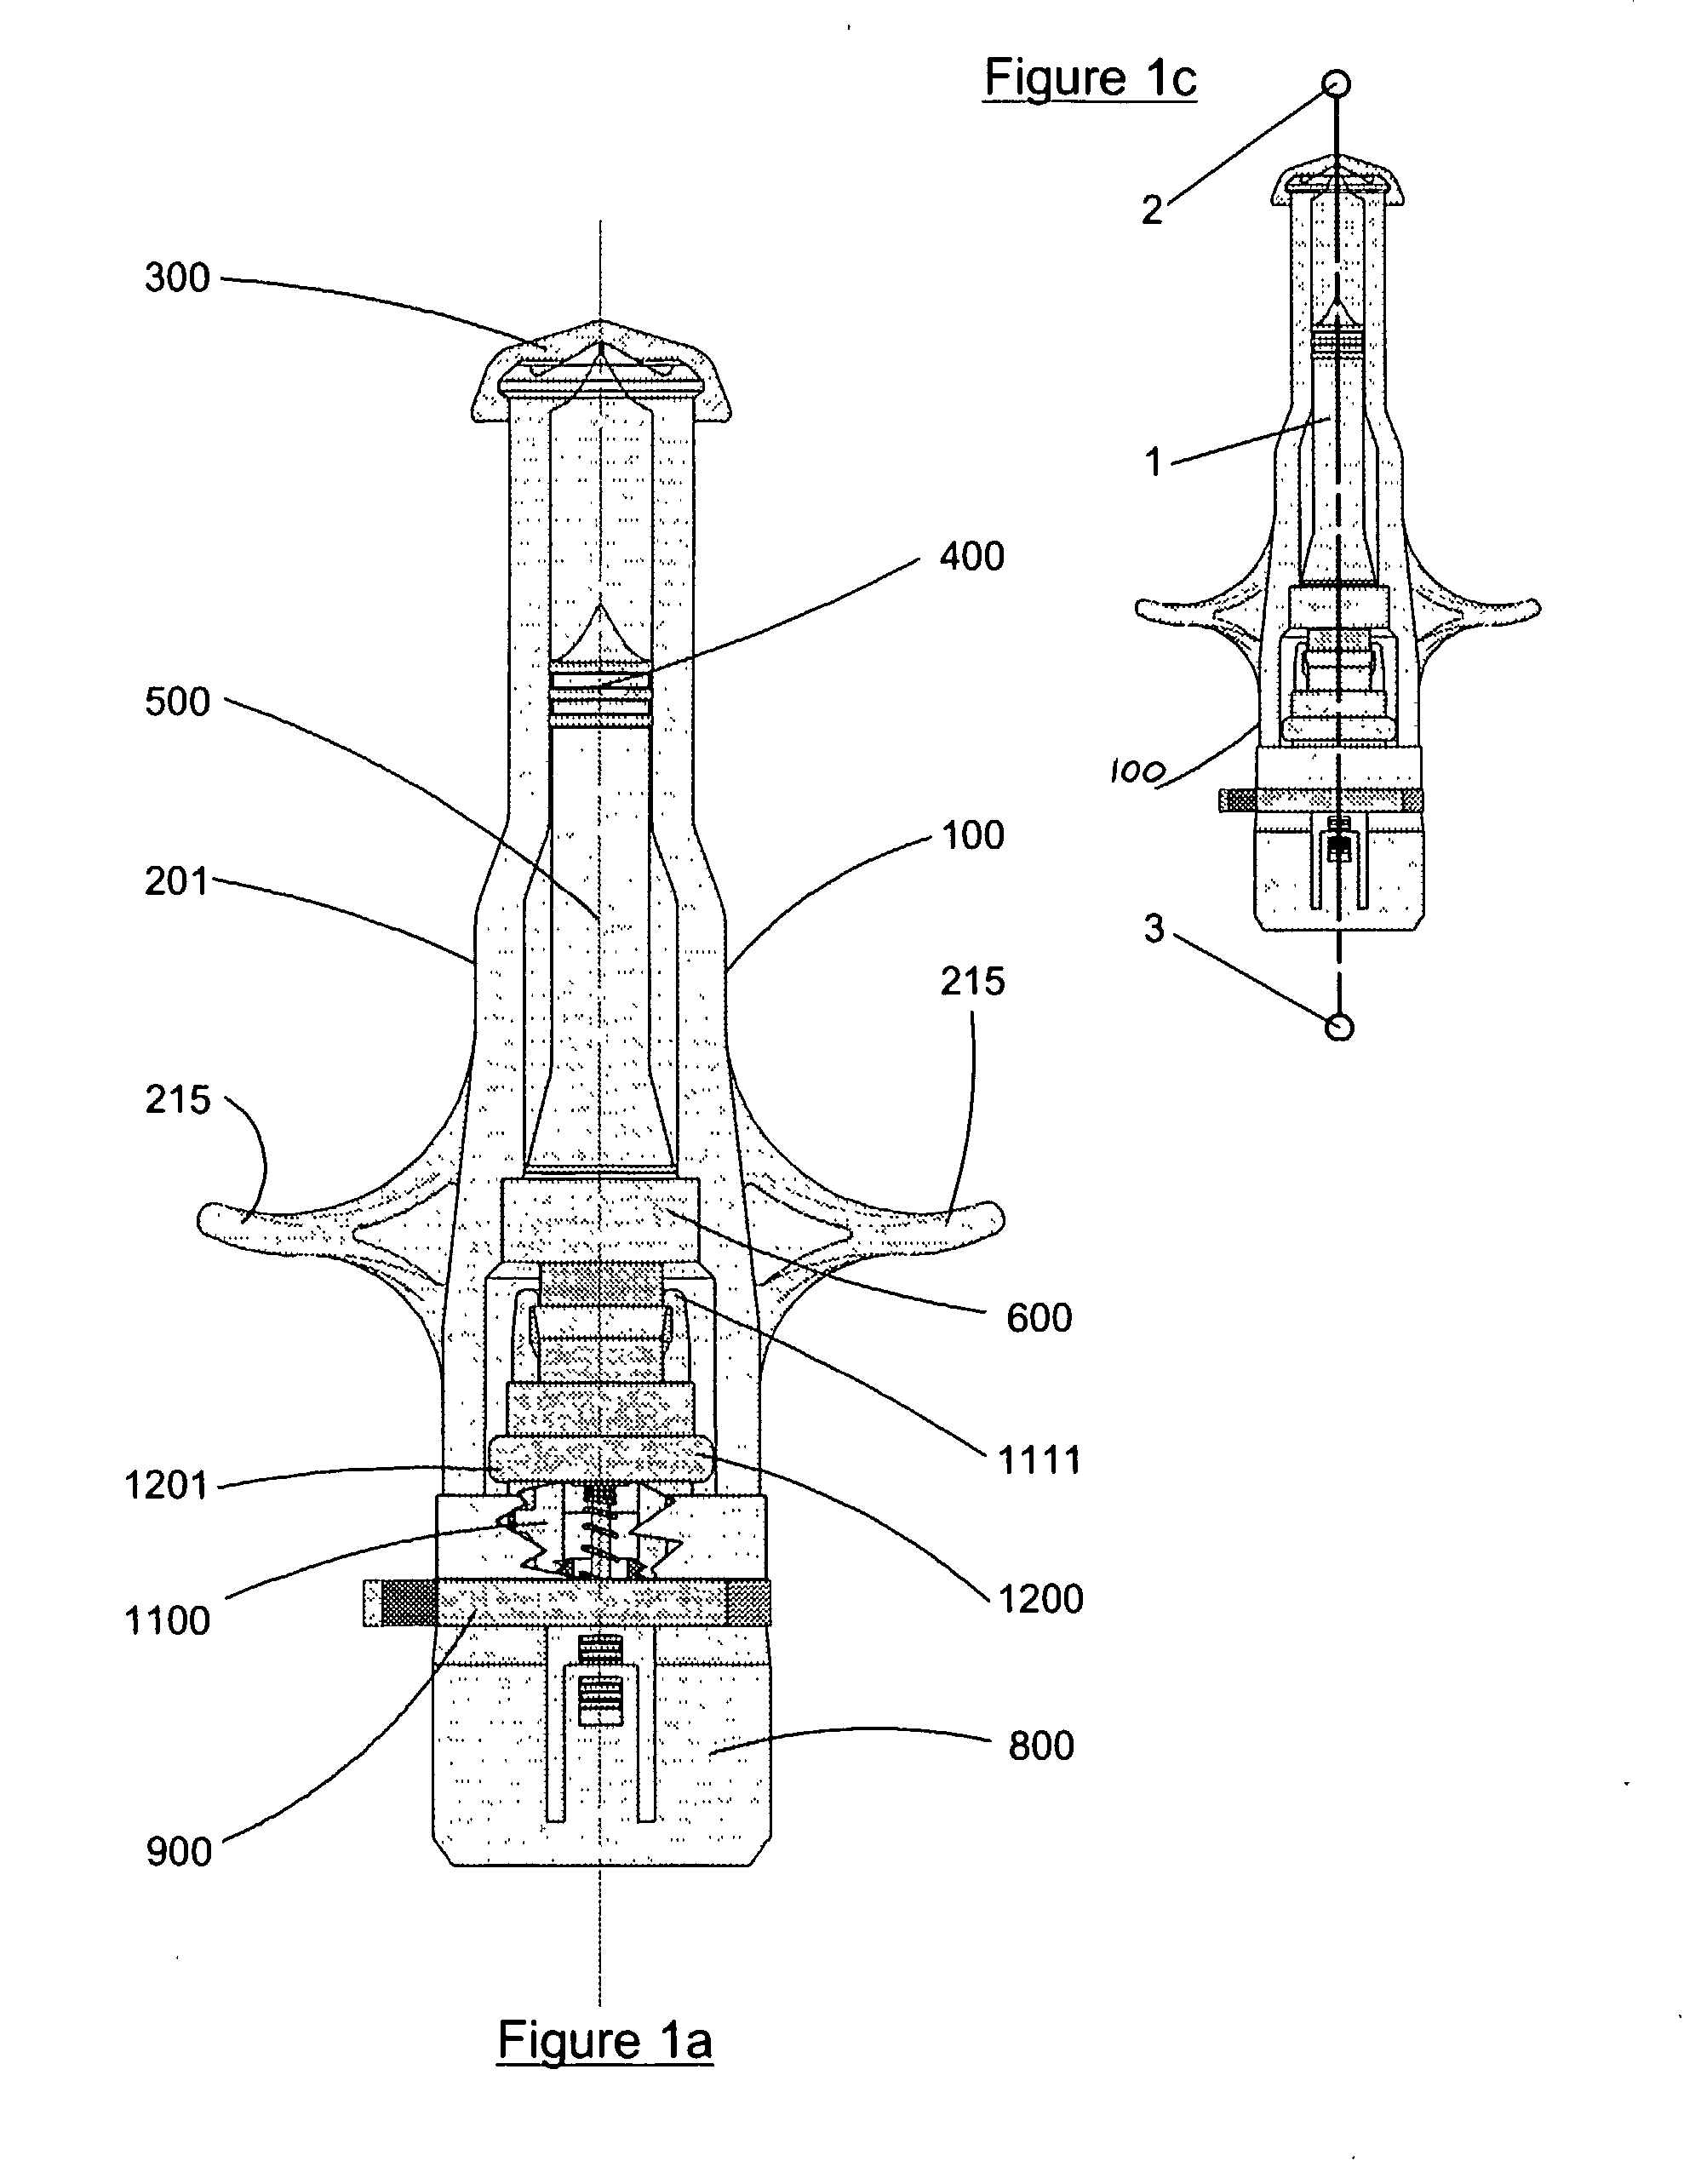 Engine and diffuser for use with a needle-less injector